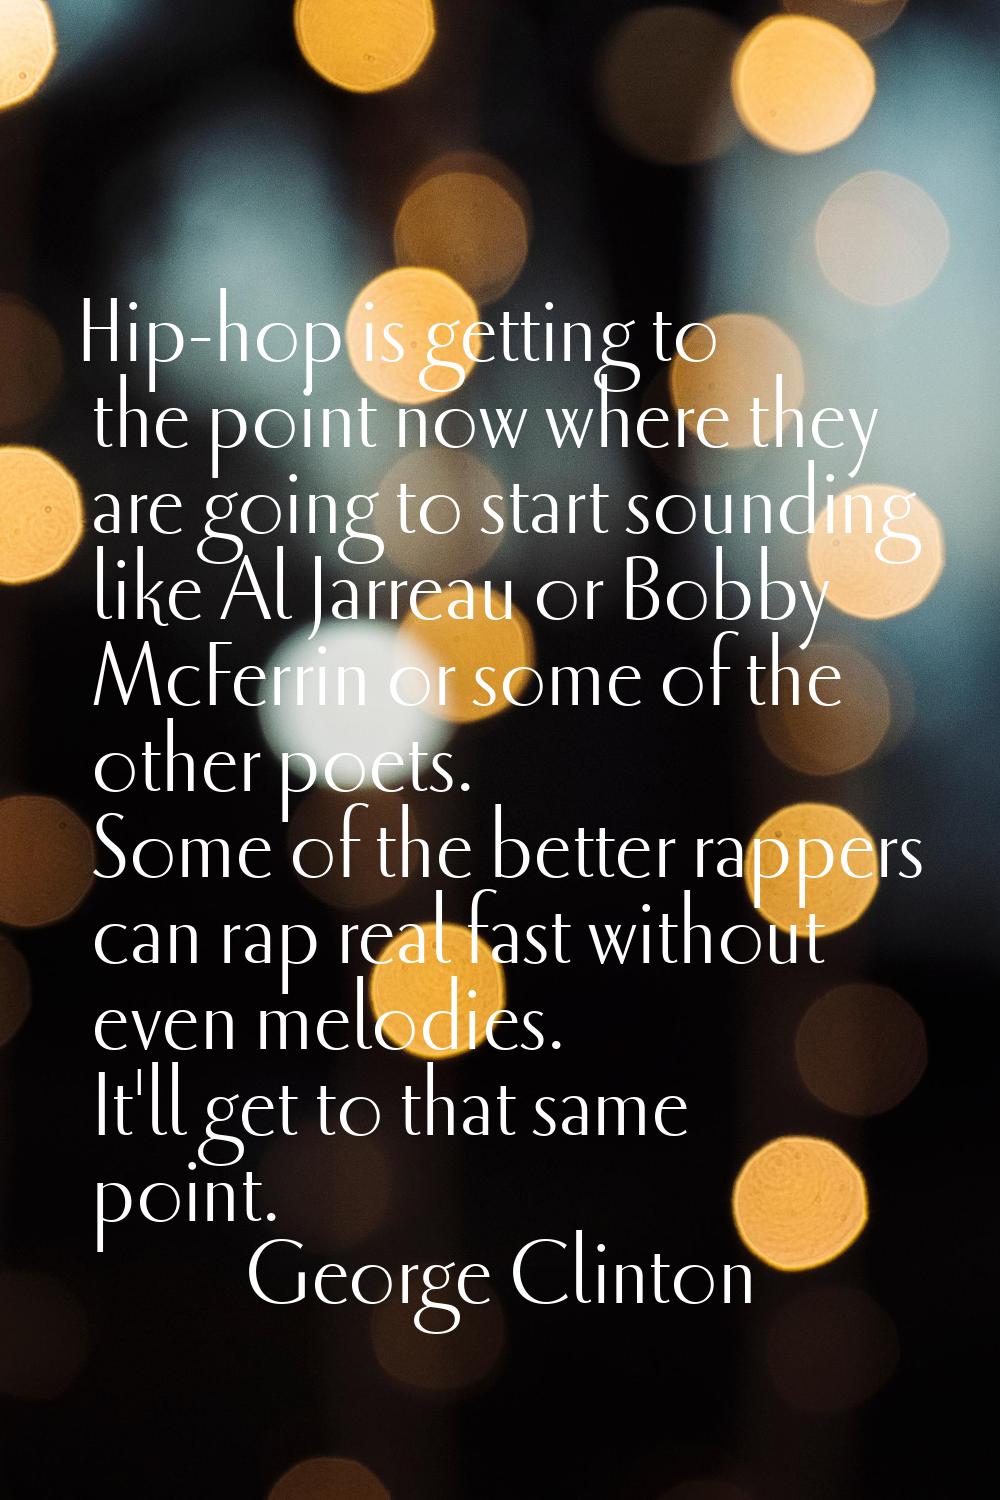 Hip-hop is getting to the point now where they are going to start sounding like Al Jarreau or Bobby